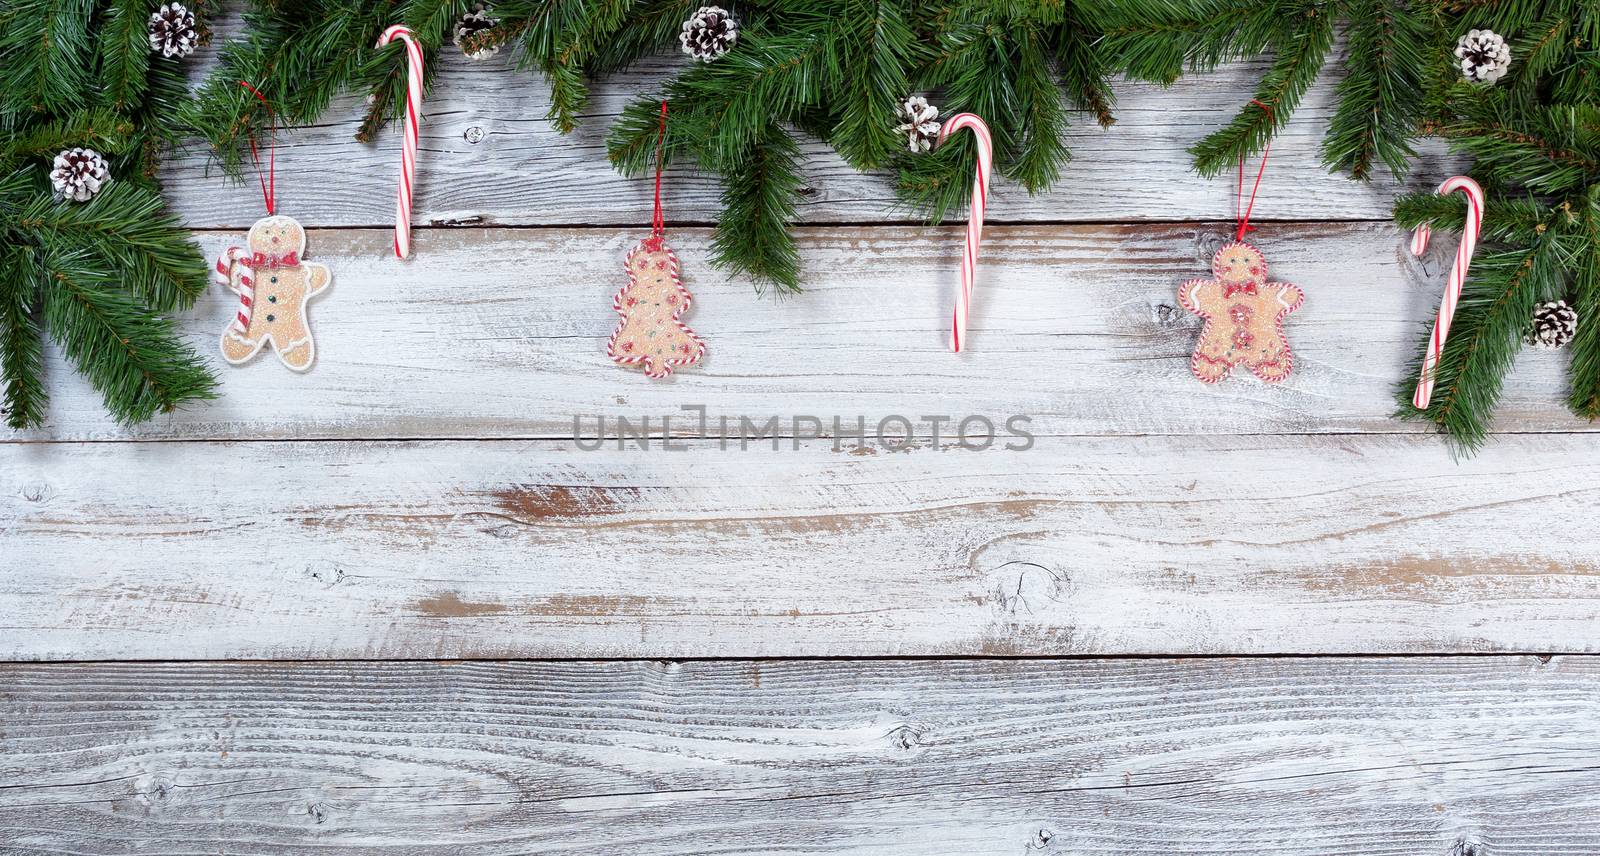 Christmas fir branches along with traditional food decorations o by tab1962